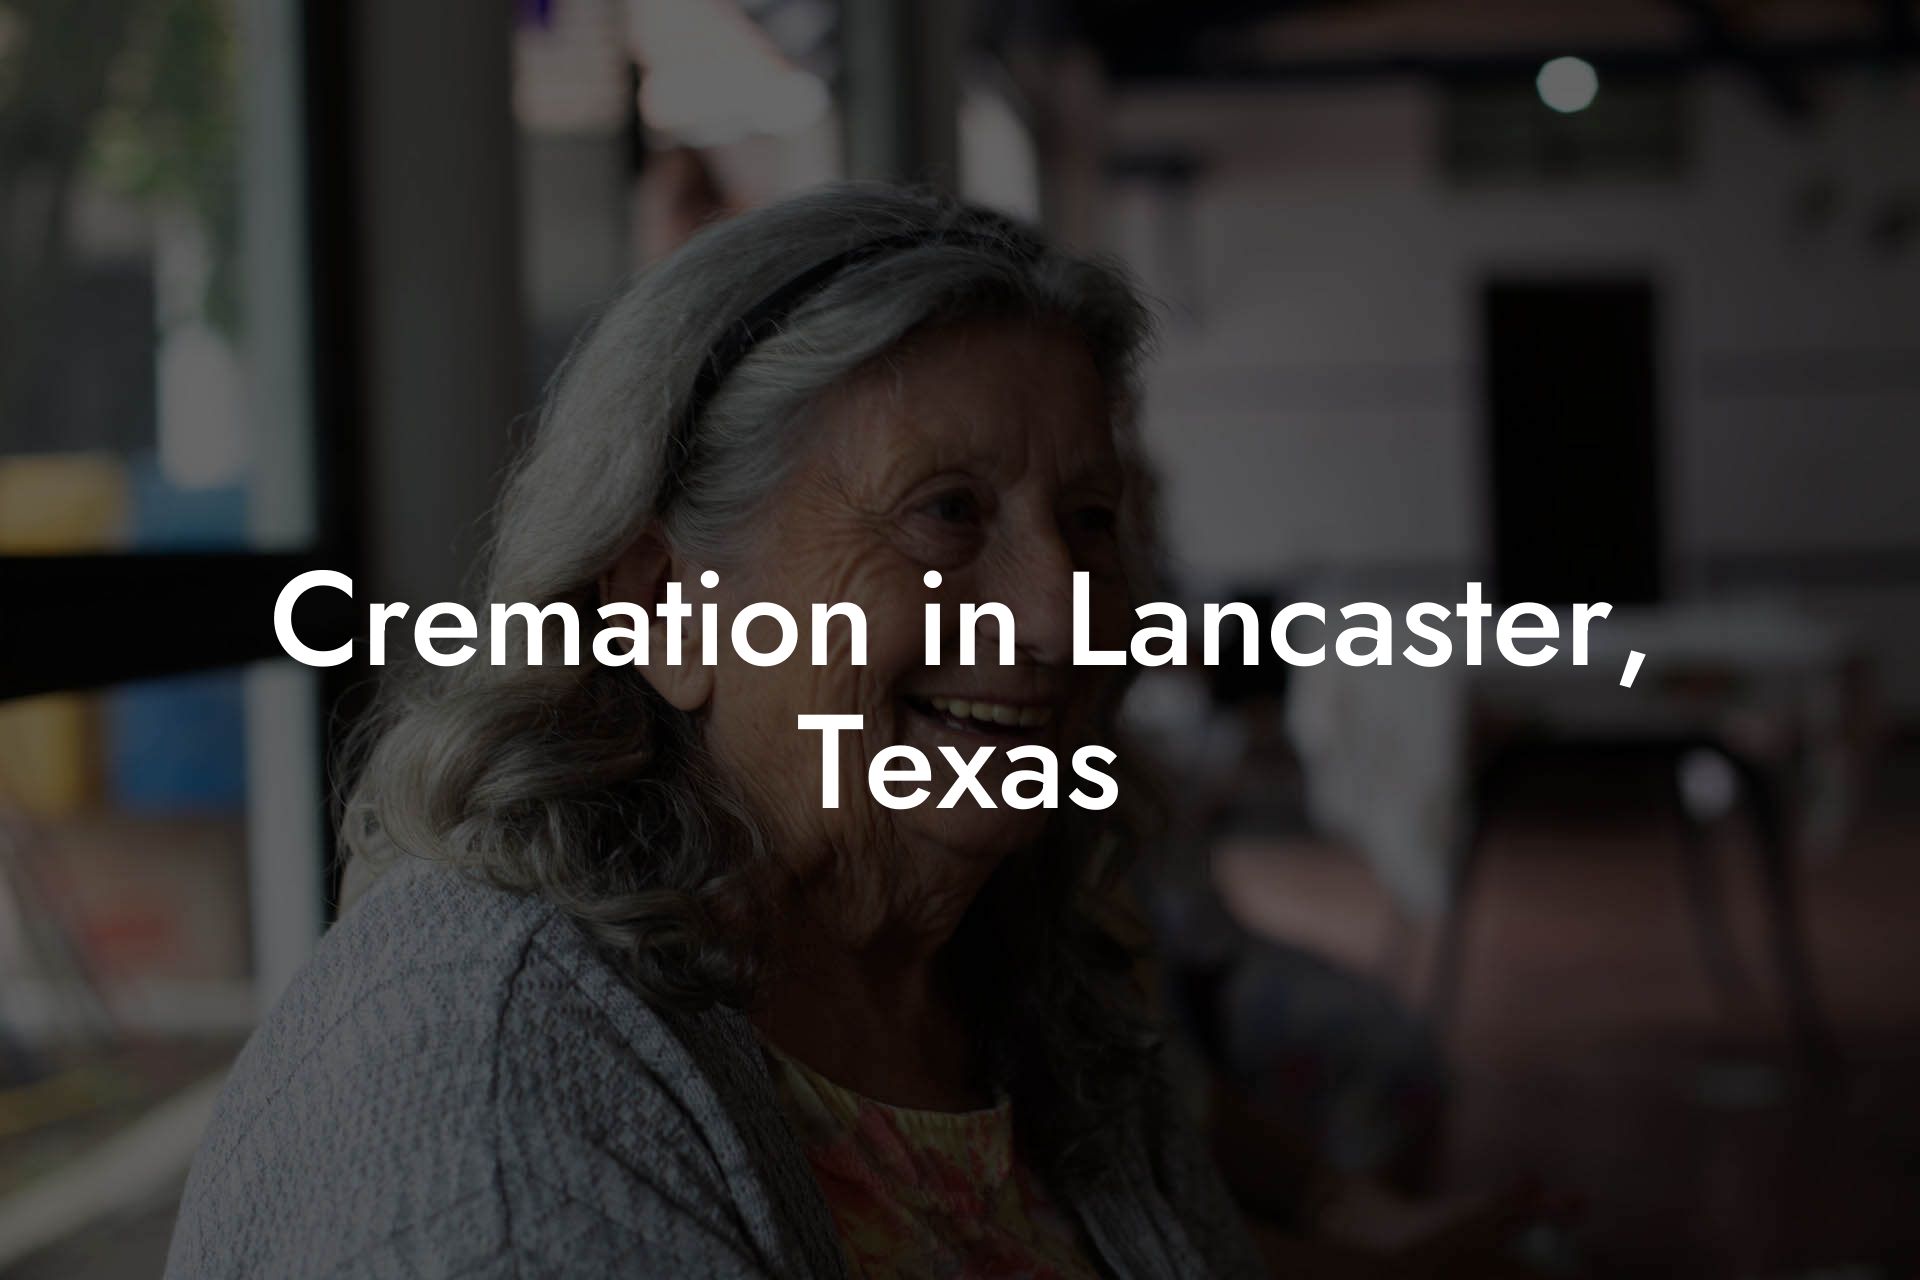 Cremation in Lancaster, Texas